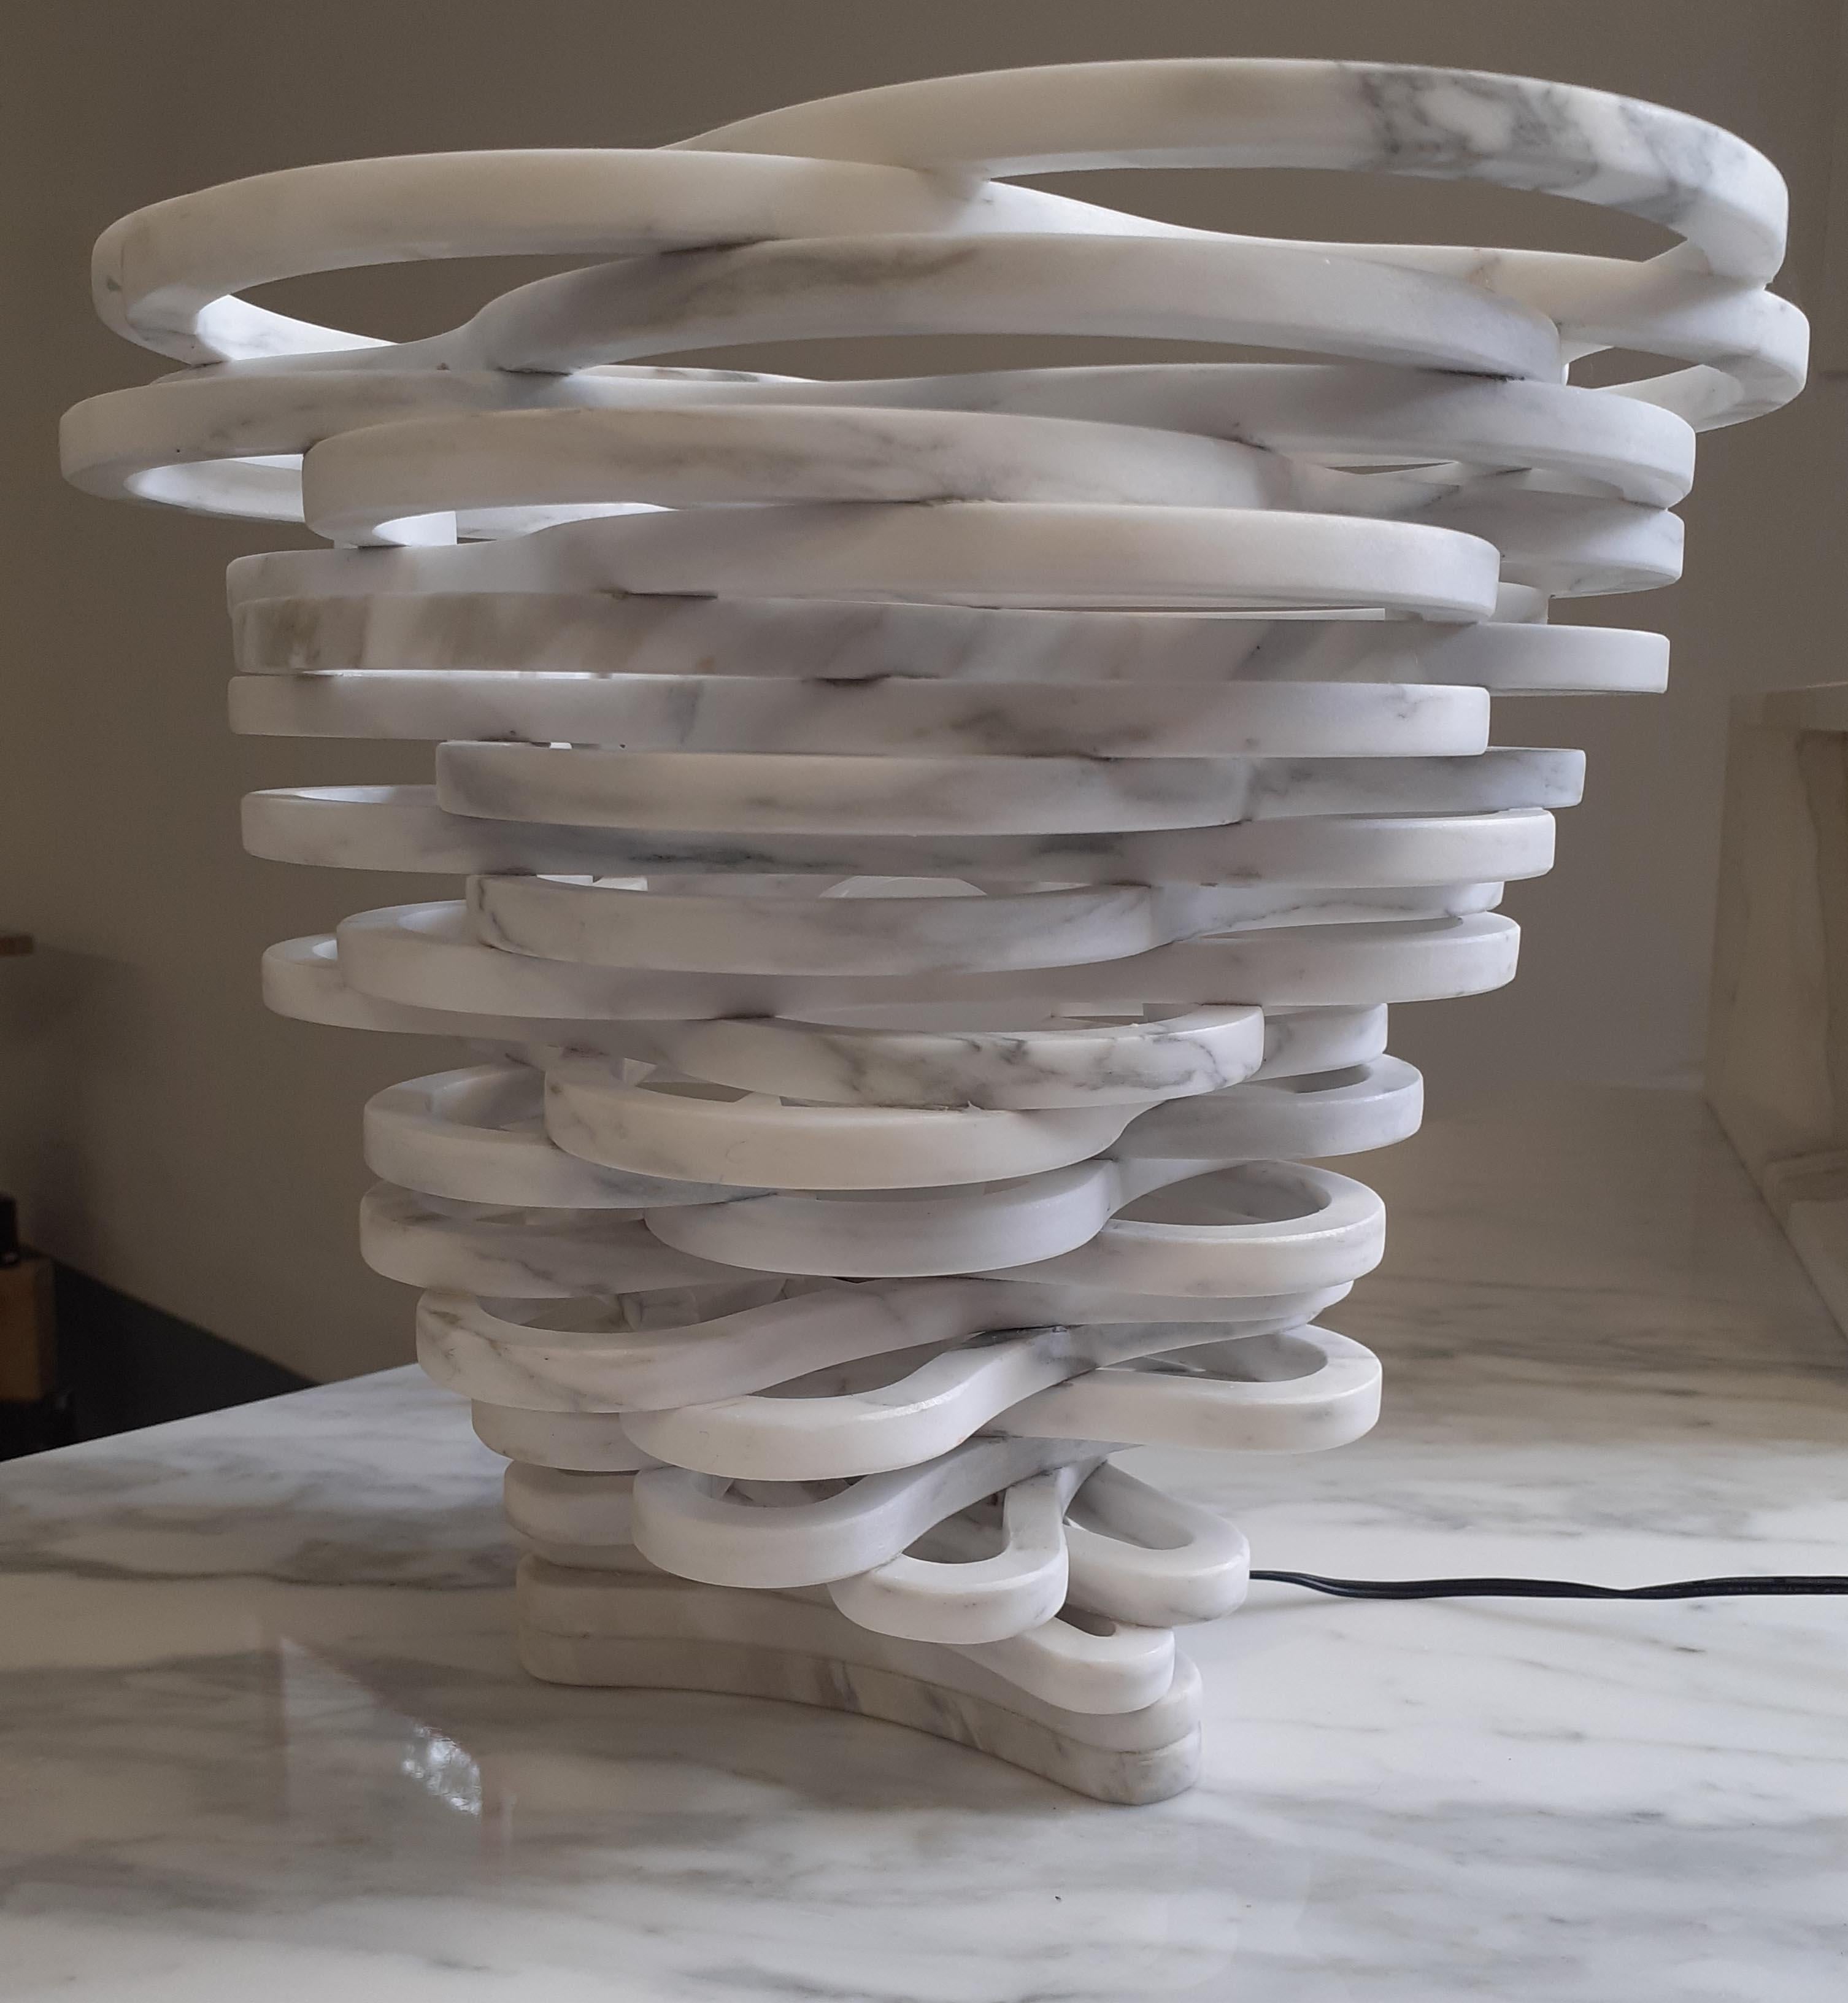 Table led lamp in white marble Carrara designed by Paolo Ullian.

Size: Diameter cm 30 x height 26
Materials: White Carrara
Designer: Paolo Ullian
Power supply: 12V Led lighting

Designer: Paolo Ullian.
 
 